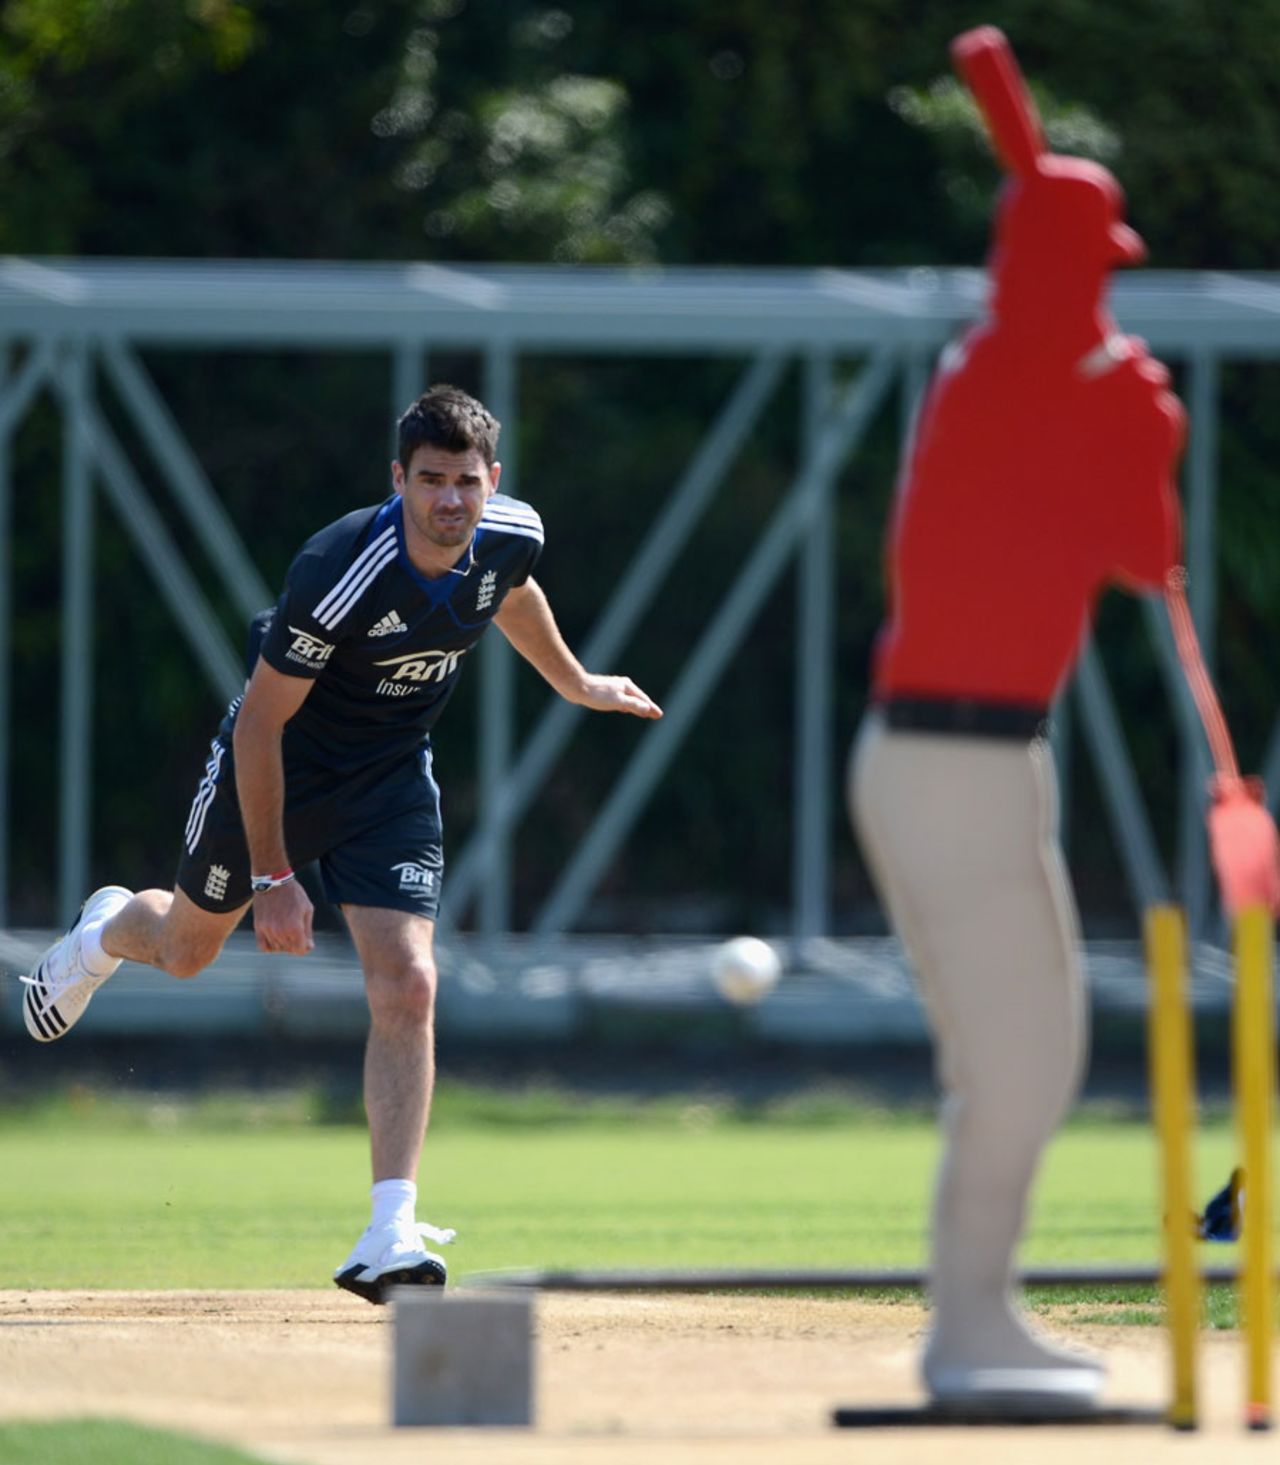 England bowler James Anderson practices ahead of the final ODI between England and New Zealand, New Zealand v England, Auckland 